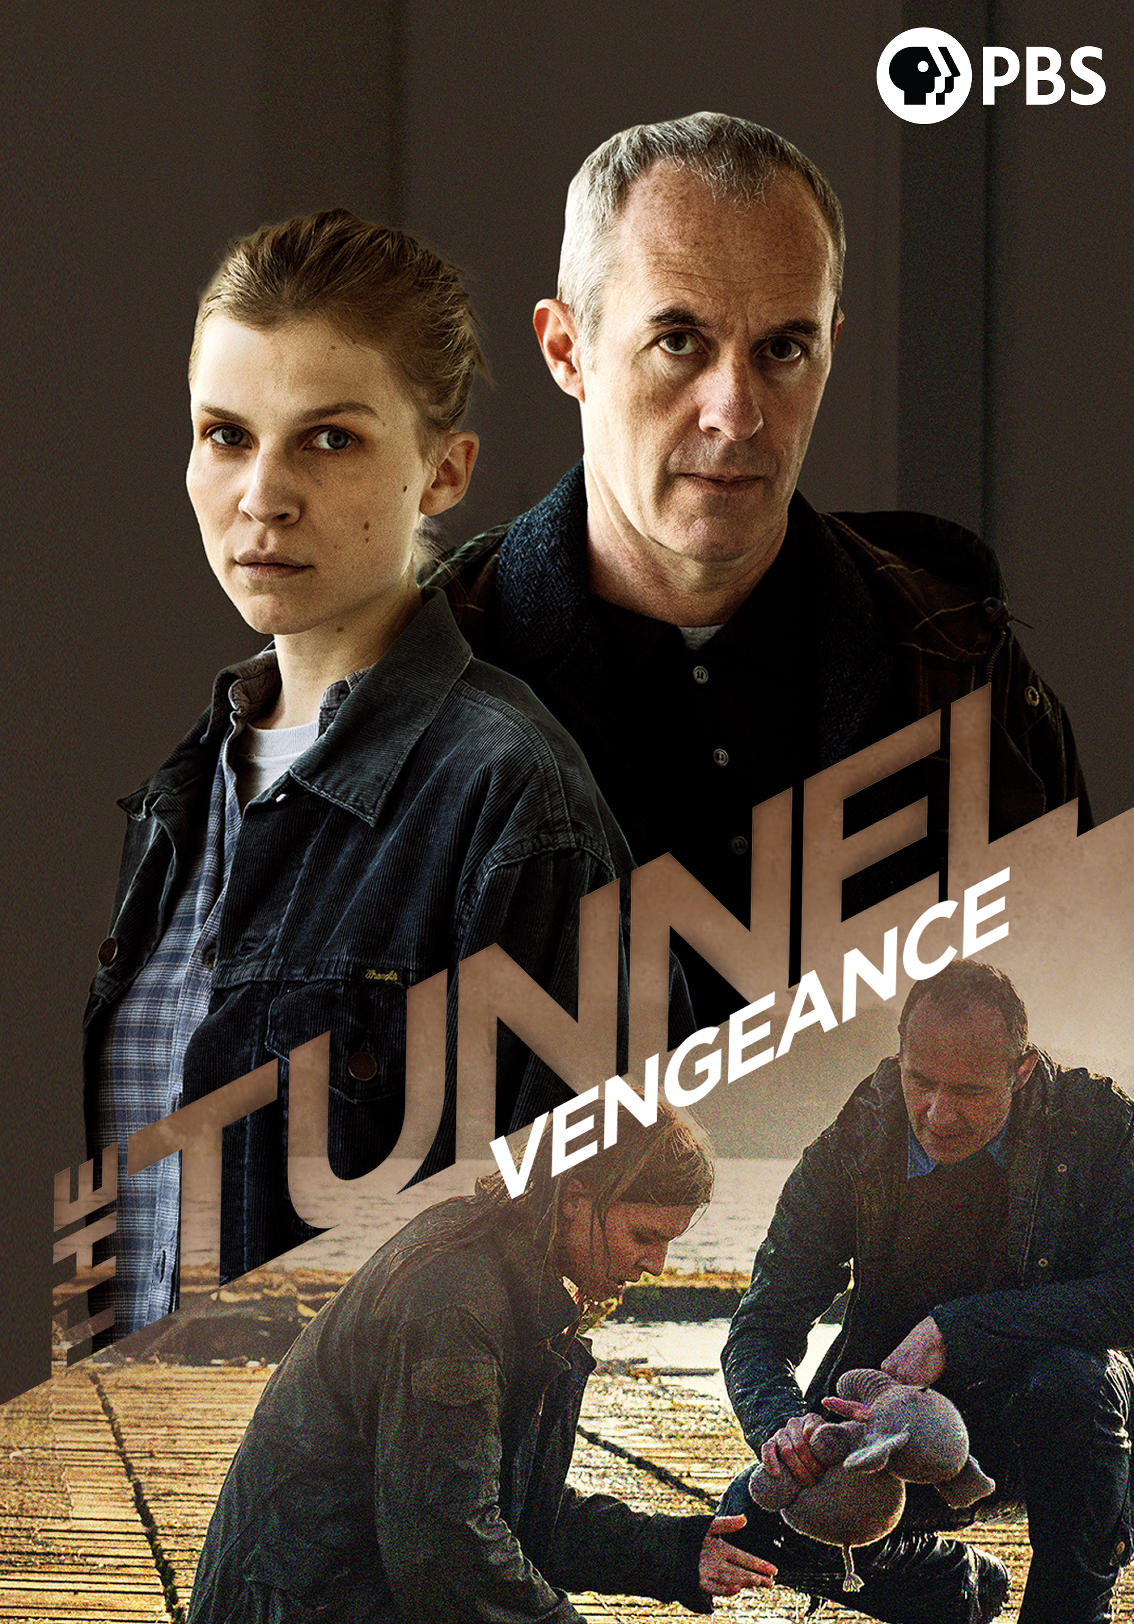 the tunnel movie